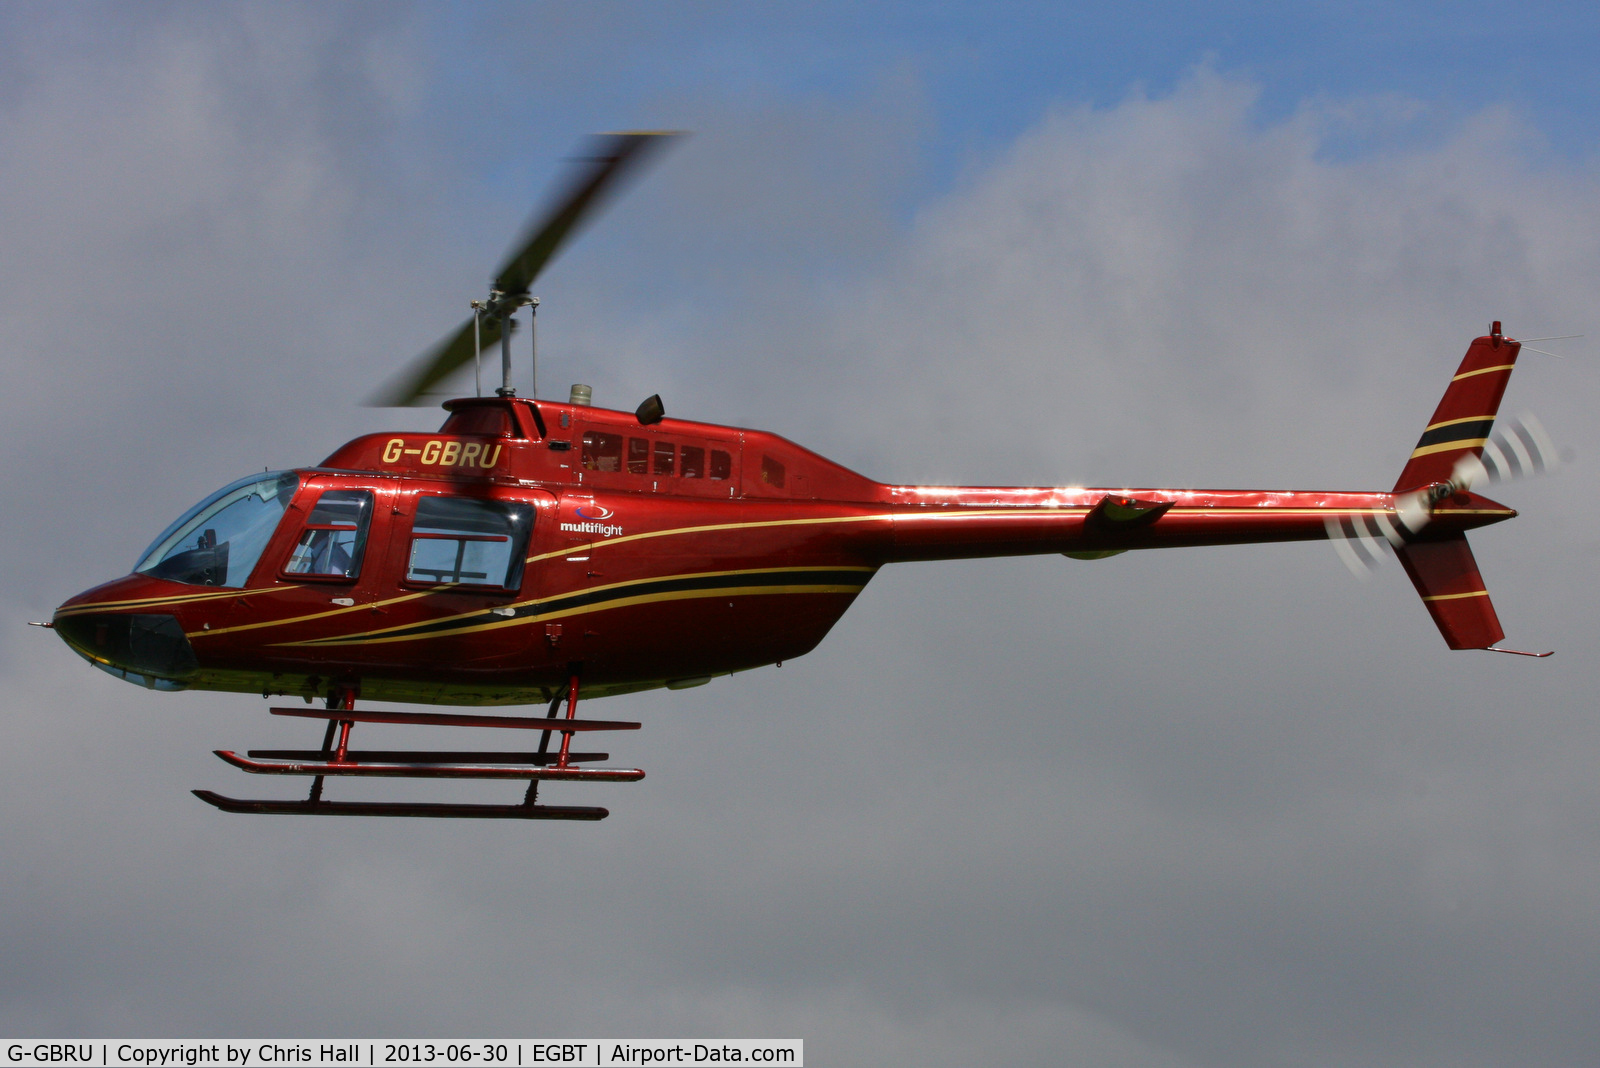 G-GBRU, 1987 Bell 206B JetRanger III C/N 3997, being used for ferrying race fans to the British F1 Grand Prix at Silverstone